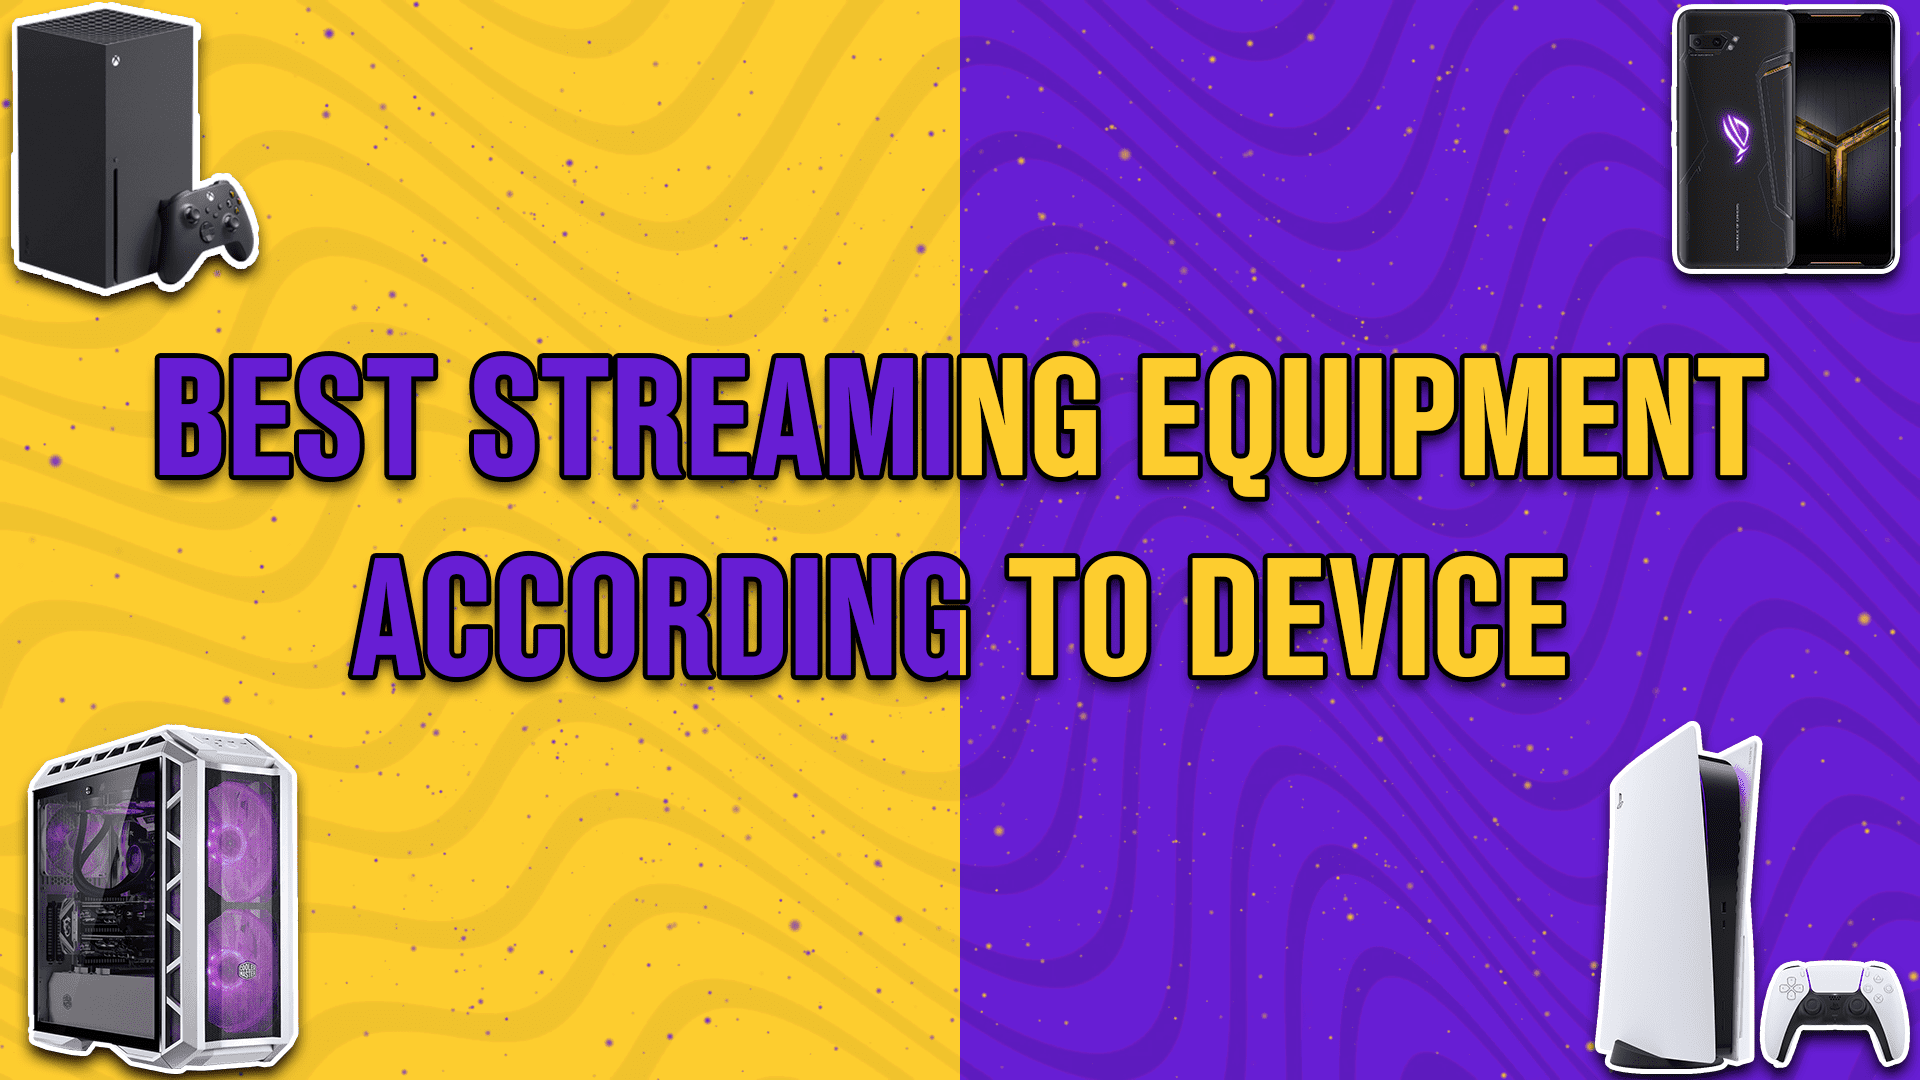 best streaming equipment according to device - StreamBee